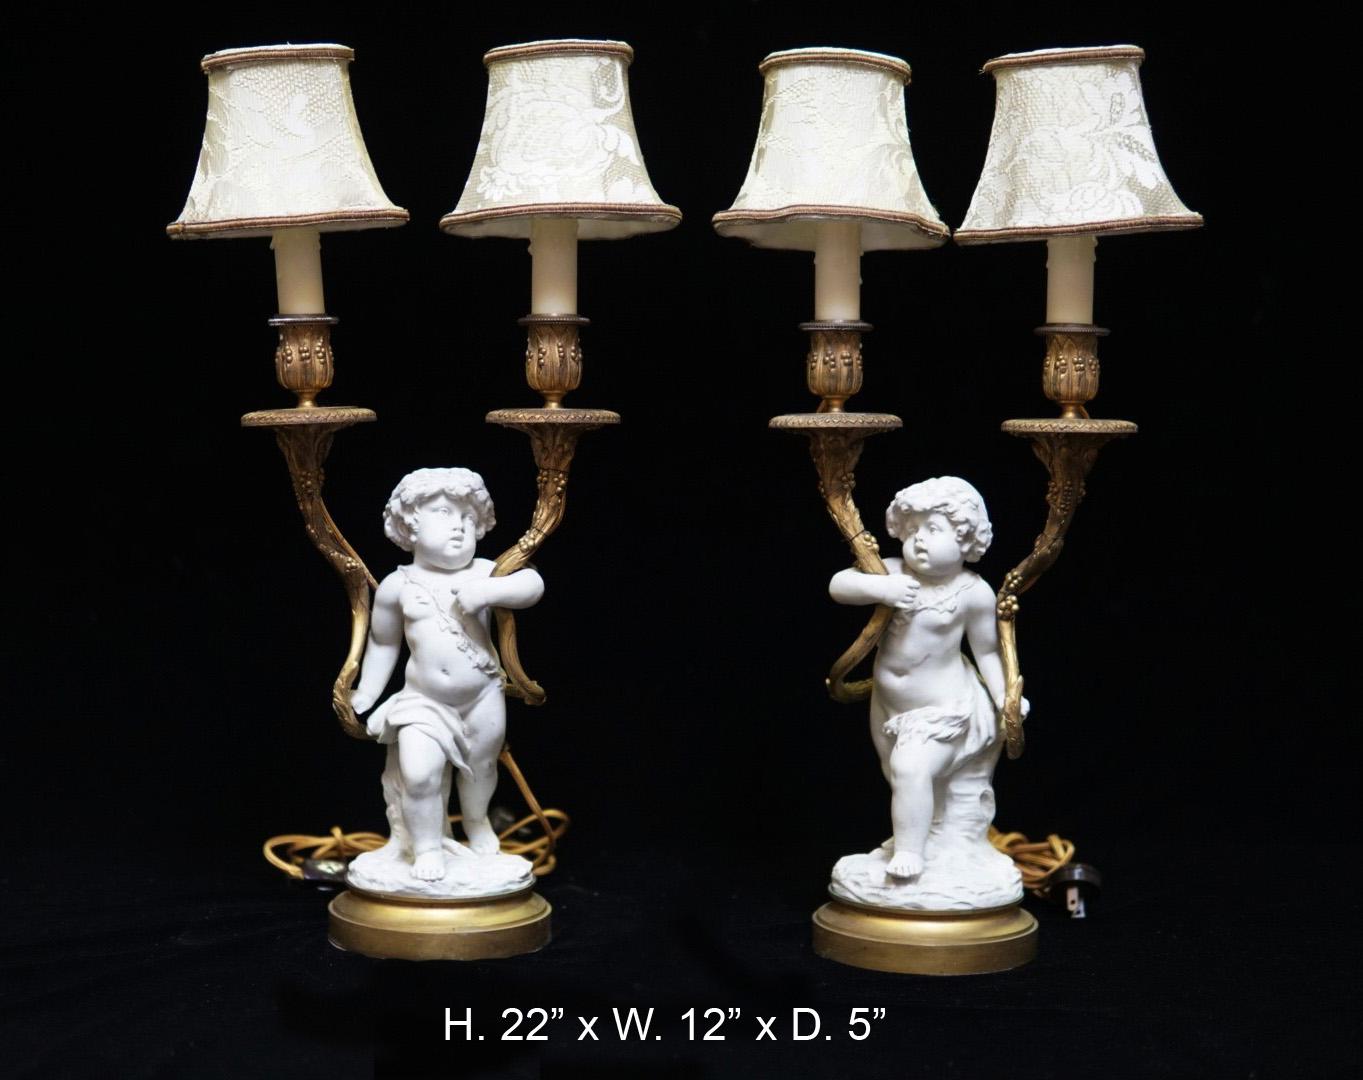 Exquisite pair of French Louis XV style white bisque figures ormolu mounted to lamps, 19 century
Each lamp is with a white bisque standing putti with a foliate wreath over his shoulder, wielding two scrolling foliate-inspired gilt bronze candle